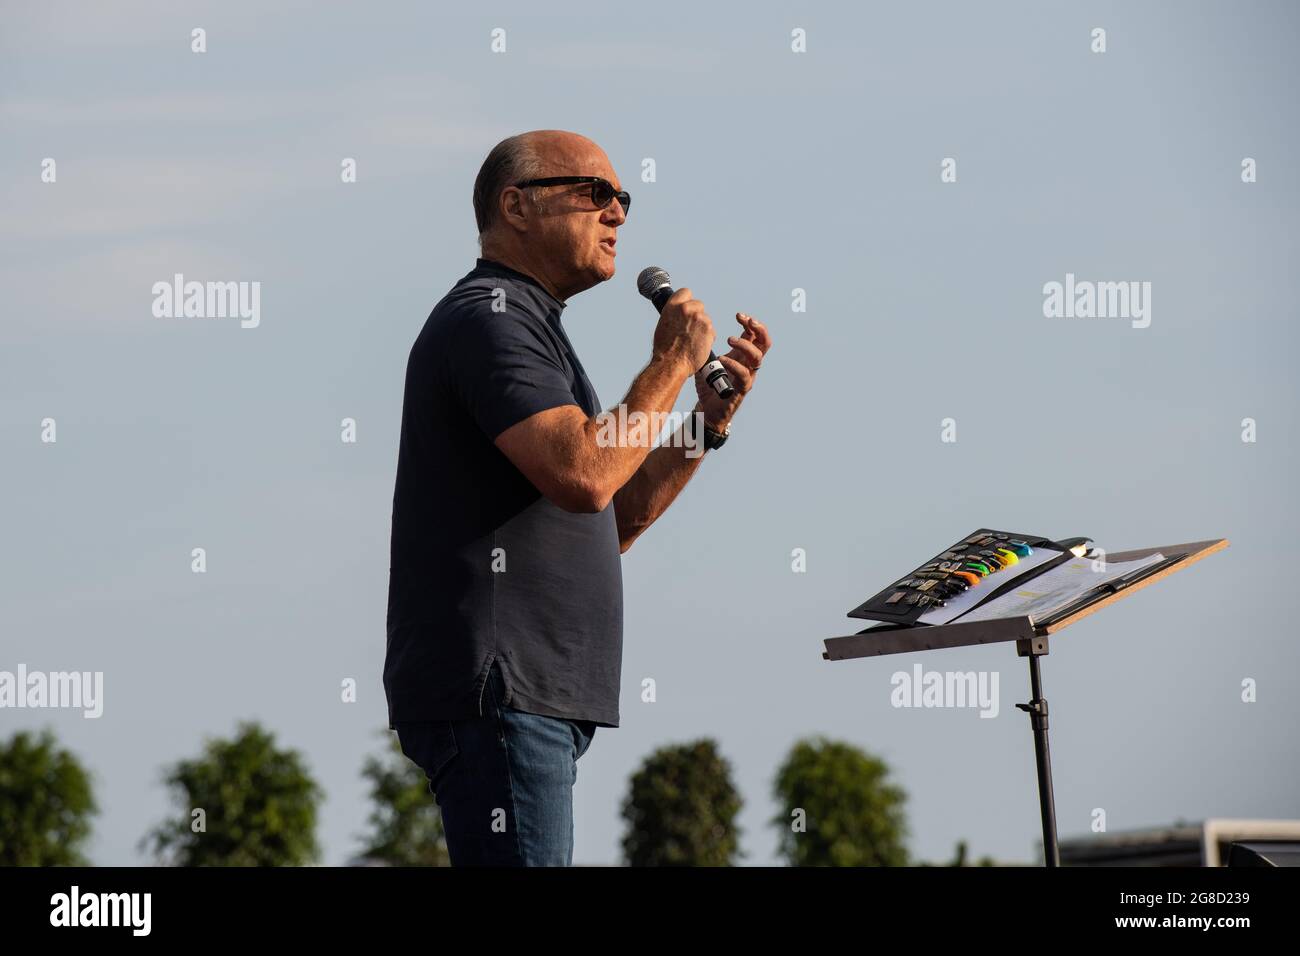 July 17, 2021, Irvine, California, USA: GREG LAURIE at FishFest 2021 at Five Point Amphitheater in Irvine, California (Credit Image: © Charlie Steffens/ZUMA Press Wire) Stock Photo